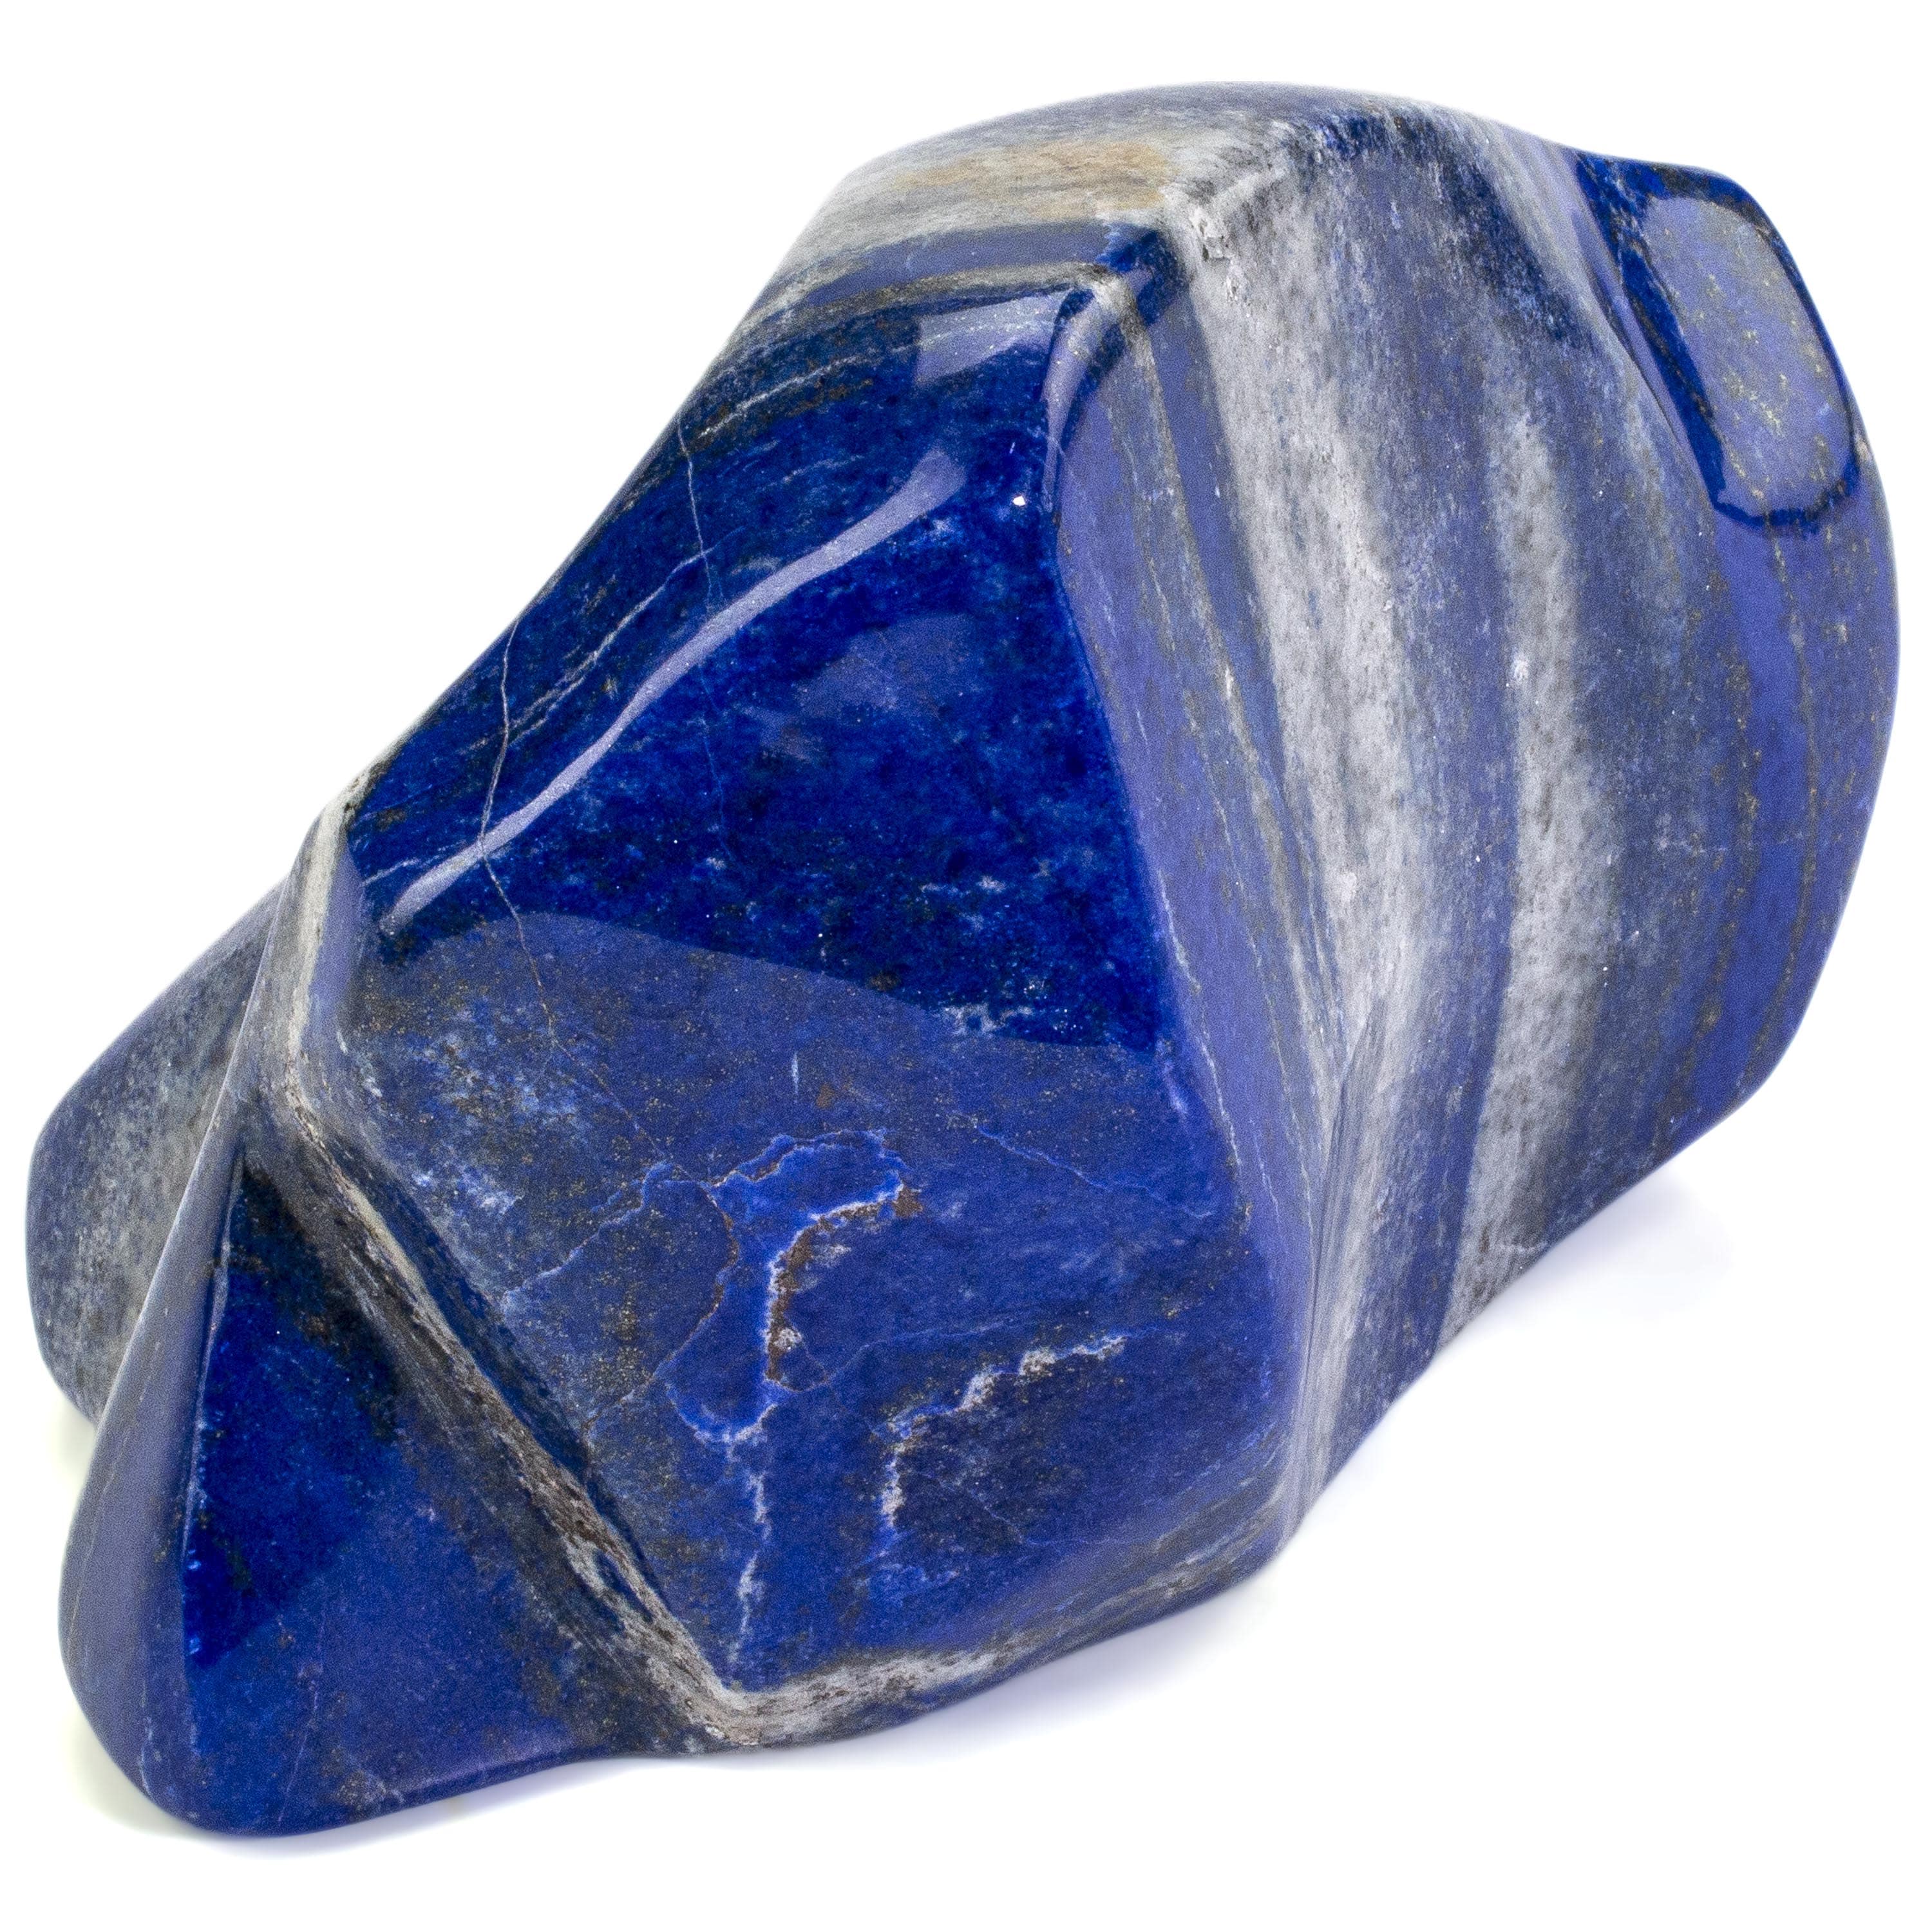 Kalifano Lapis Lapis Lazuil Freeform from Afghanistan - 1.9 kg / 4.3 lbs LP2100.001